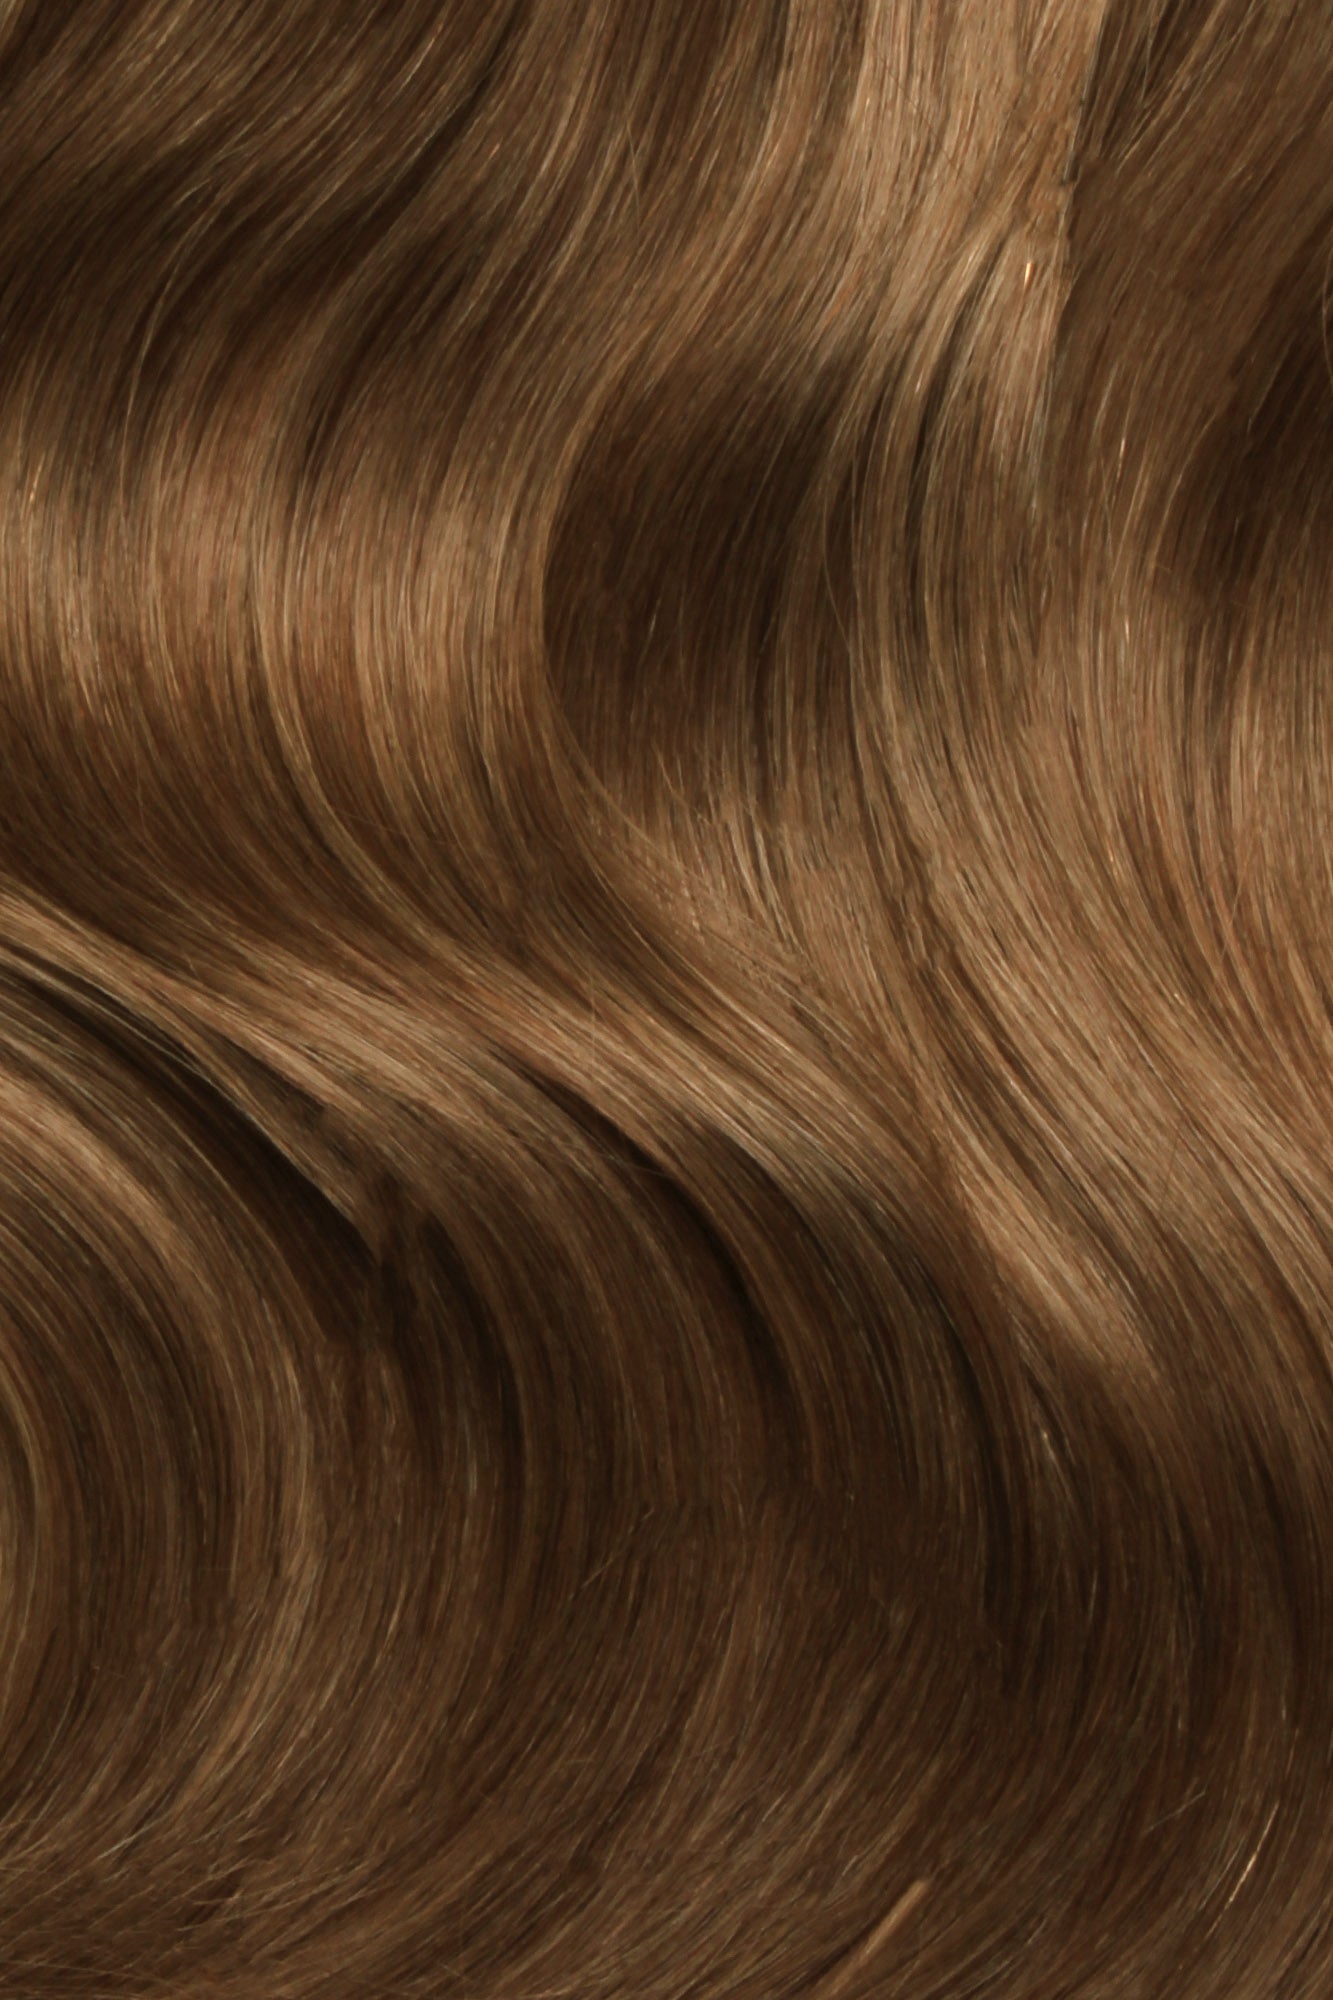 SEAMLESS® Flat Weft 22 Inches - SWAY Hair Extensions Chestnut-Brown-Mix-4-6 Natural SEAMLESS® Flat Weft 22 Inches extensions. Thin, flexible, and discreet. 100% Double Drawn Remy Human Hair. Versatile and reusable